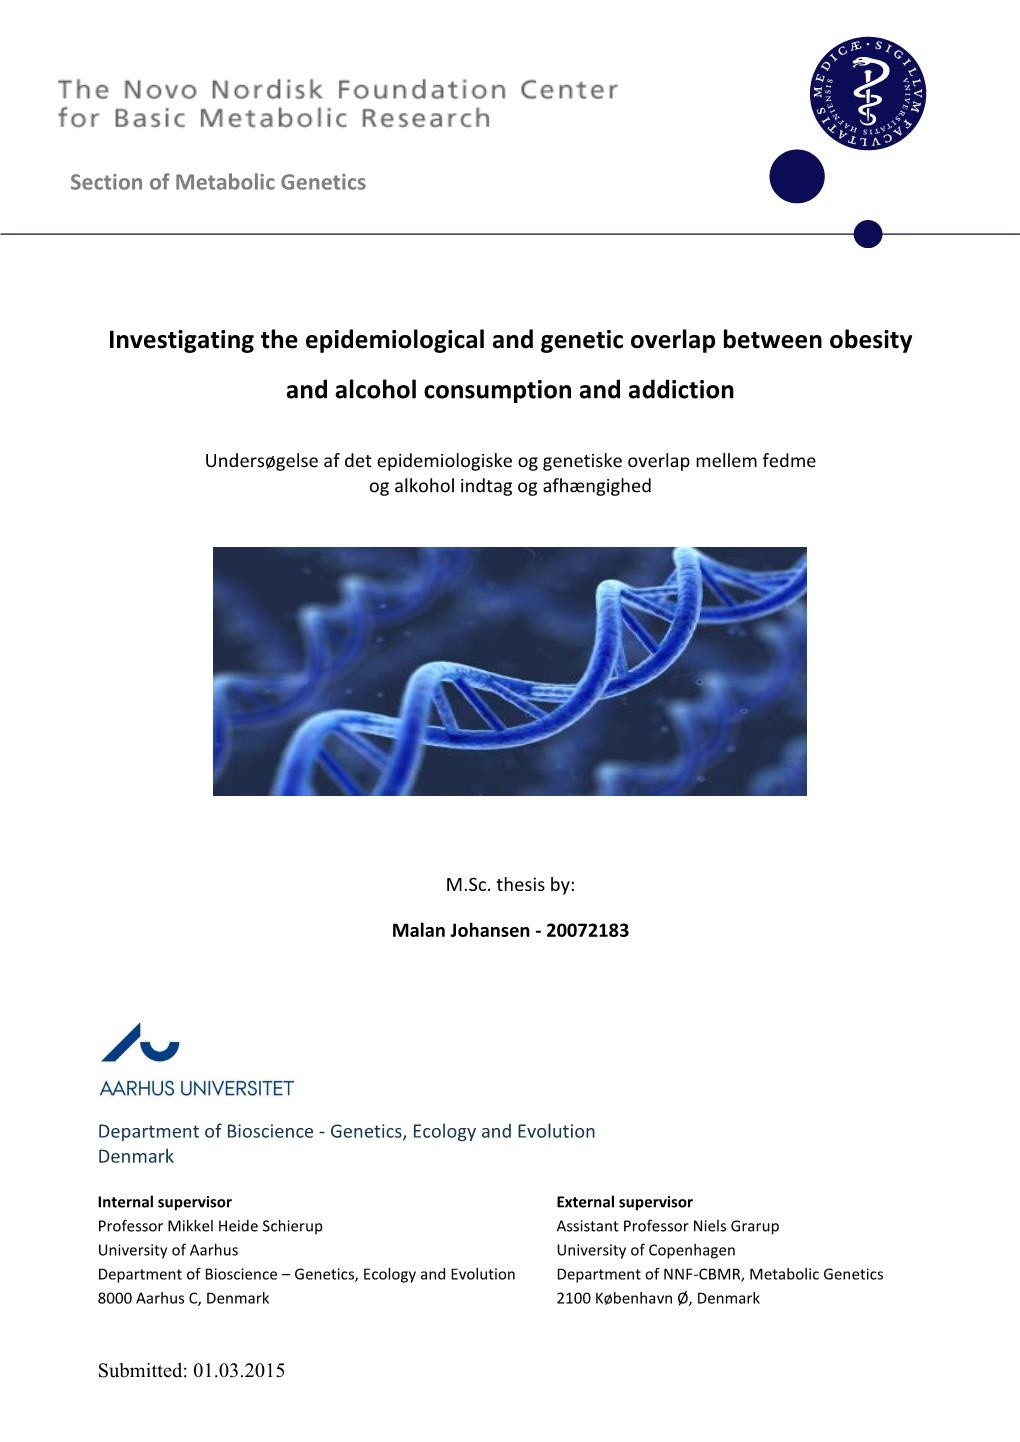 Investigating the Epidemiological and Genetic Overlap Between Obesity and Alcohol Consumption and Addiction